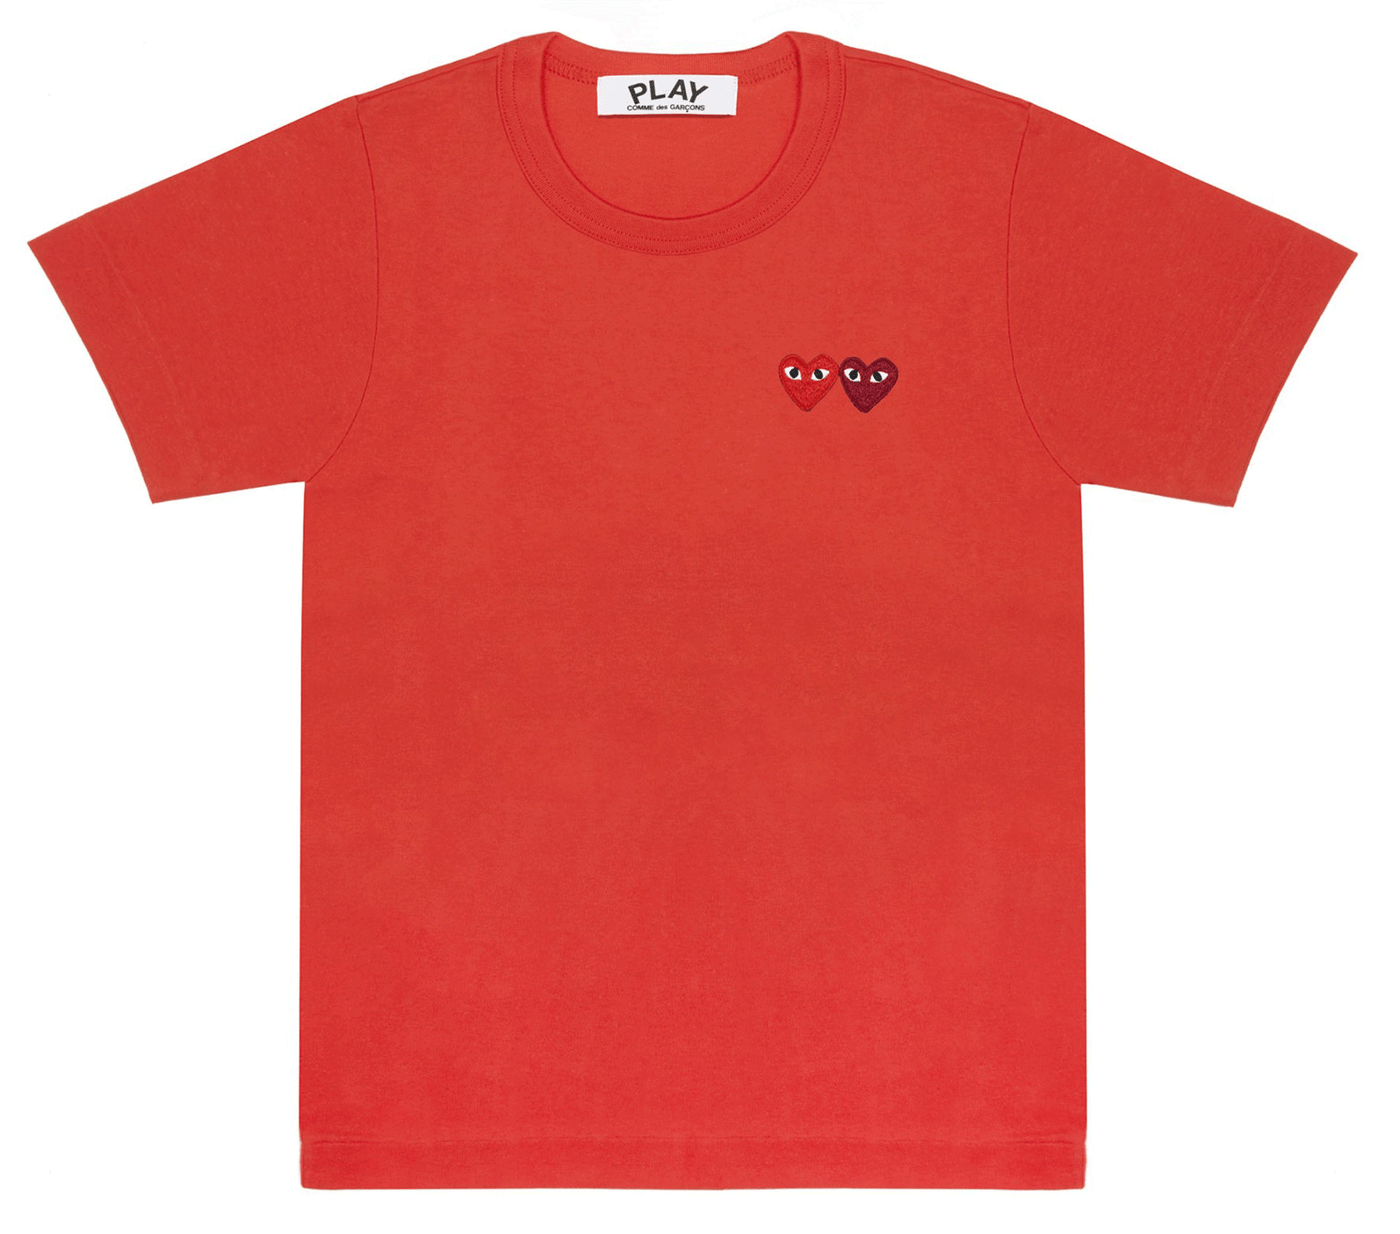 Comme-des-Garcons-Play-Embroidered-Logo-Double-Heart-Cotton-T-Shirt-Men-Red-1